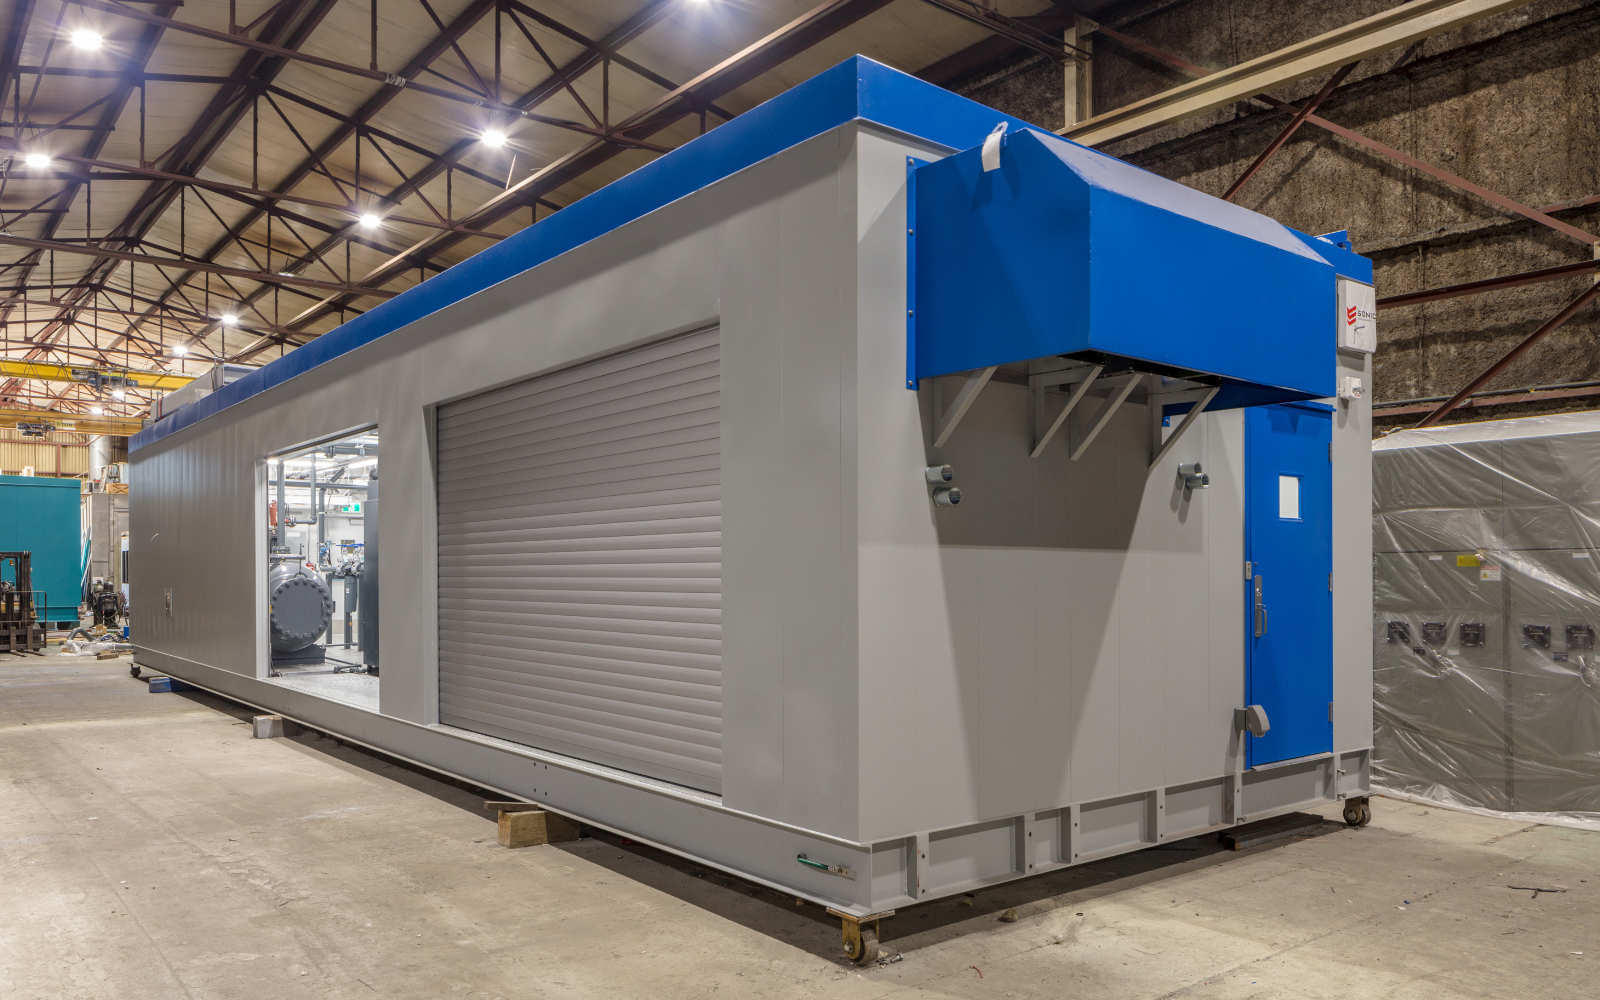 Altas Copco, ZT160 Compressors, CD350 Dryer, 3-way by-pass filtration system, 660USG receiver tank, Wireless Pressure and Temperature transmitters, Re-circulation exhausts ducting, PLC automatic control, built-in sump and pump drainage system, roll-up doors, electrical and controls systems, Fire Suppression and Detection, Prefabricated, Sonic Enclosures